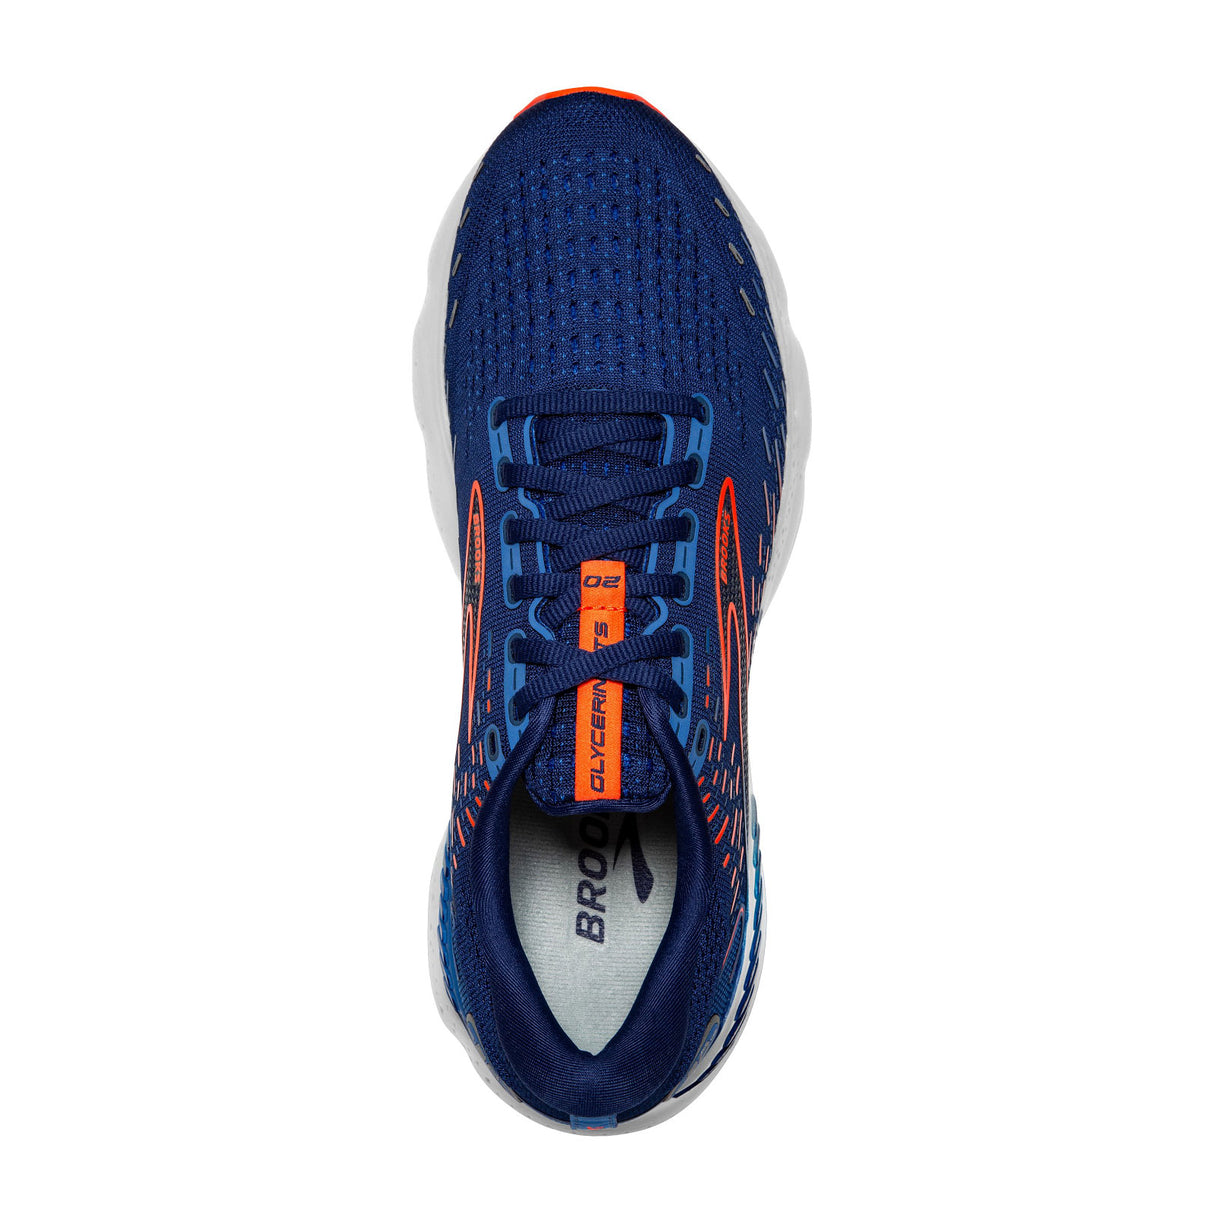 Brooks Glycerin GTS 20 (Men) - Blue Depths/Palace Blue/Orange Athletic - Running - Stability - The Heel Shoe Fitters